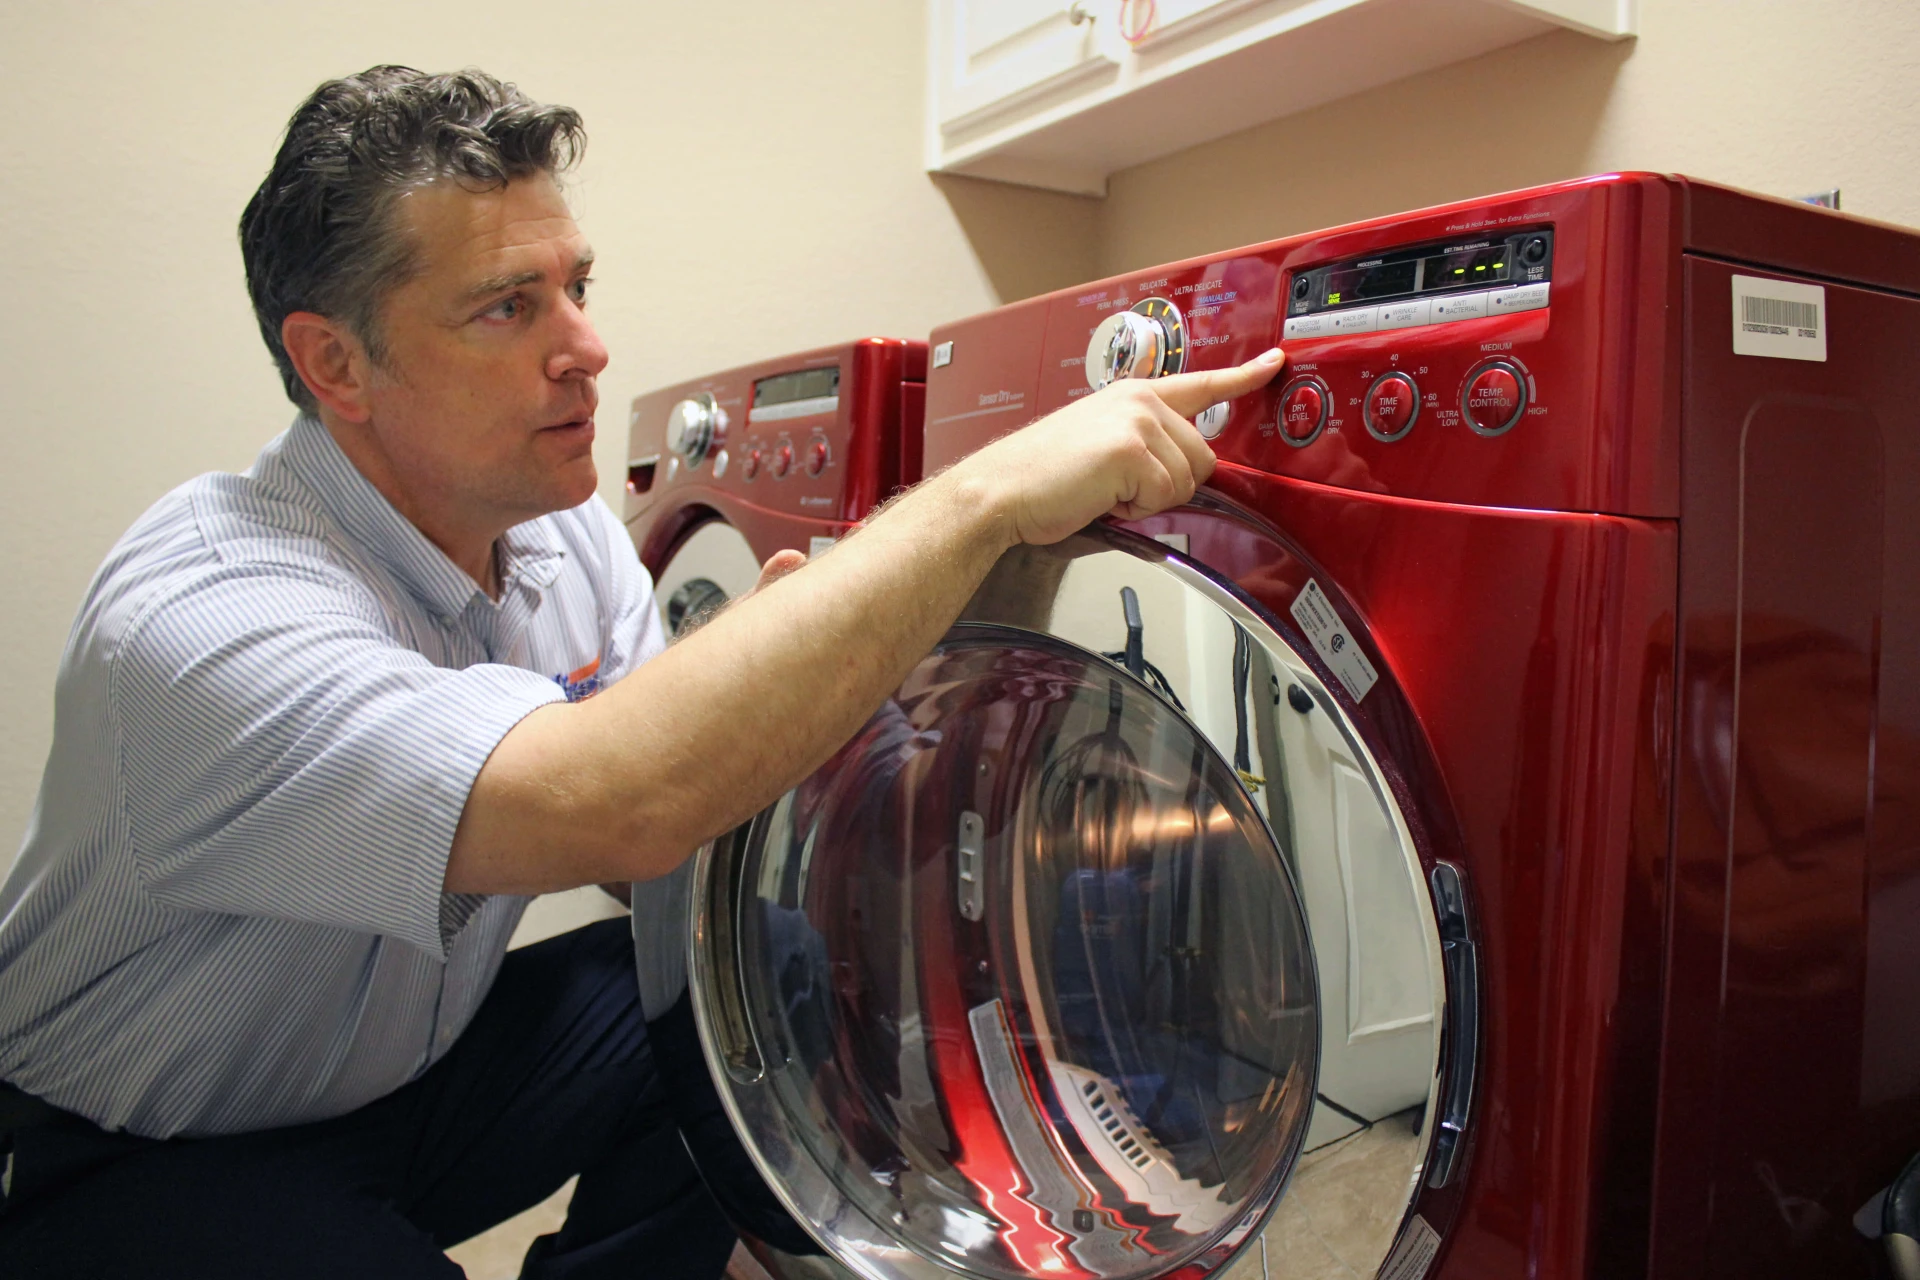 alt="Mr. Appliance technician servicing a washer and dryer"